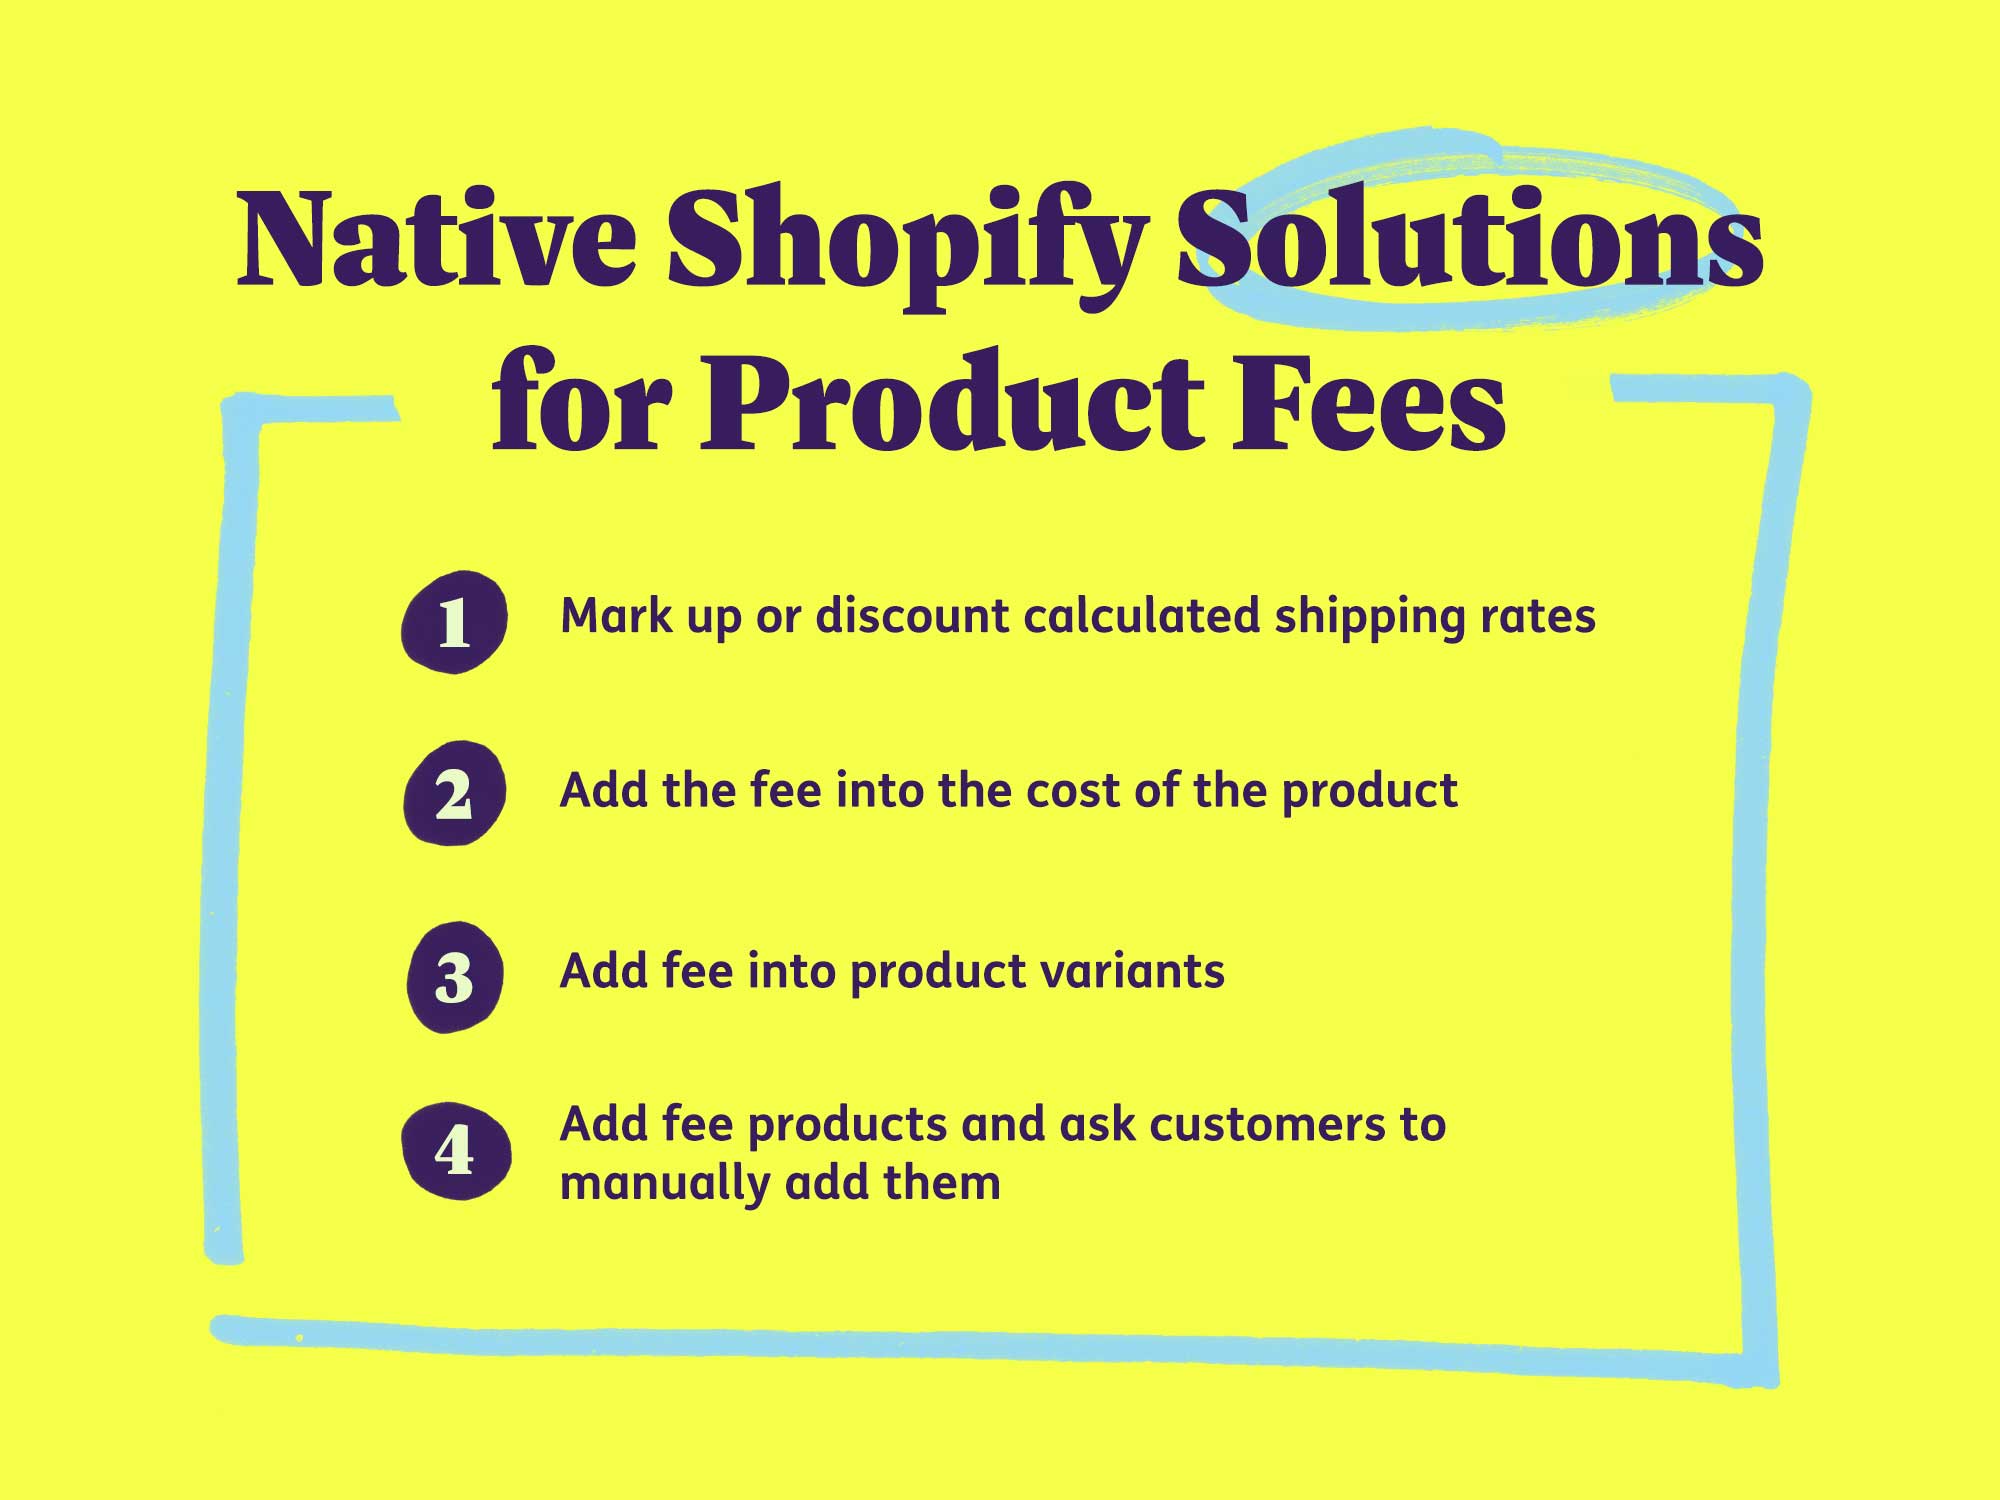 Native Shopify solutions for product fees: Mark up or discount calculated shipping rates, Add the fee into the cost of the product, Add fee into product variants, or Add fee products and ask customers to manually add them